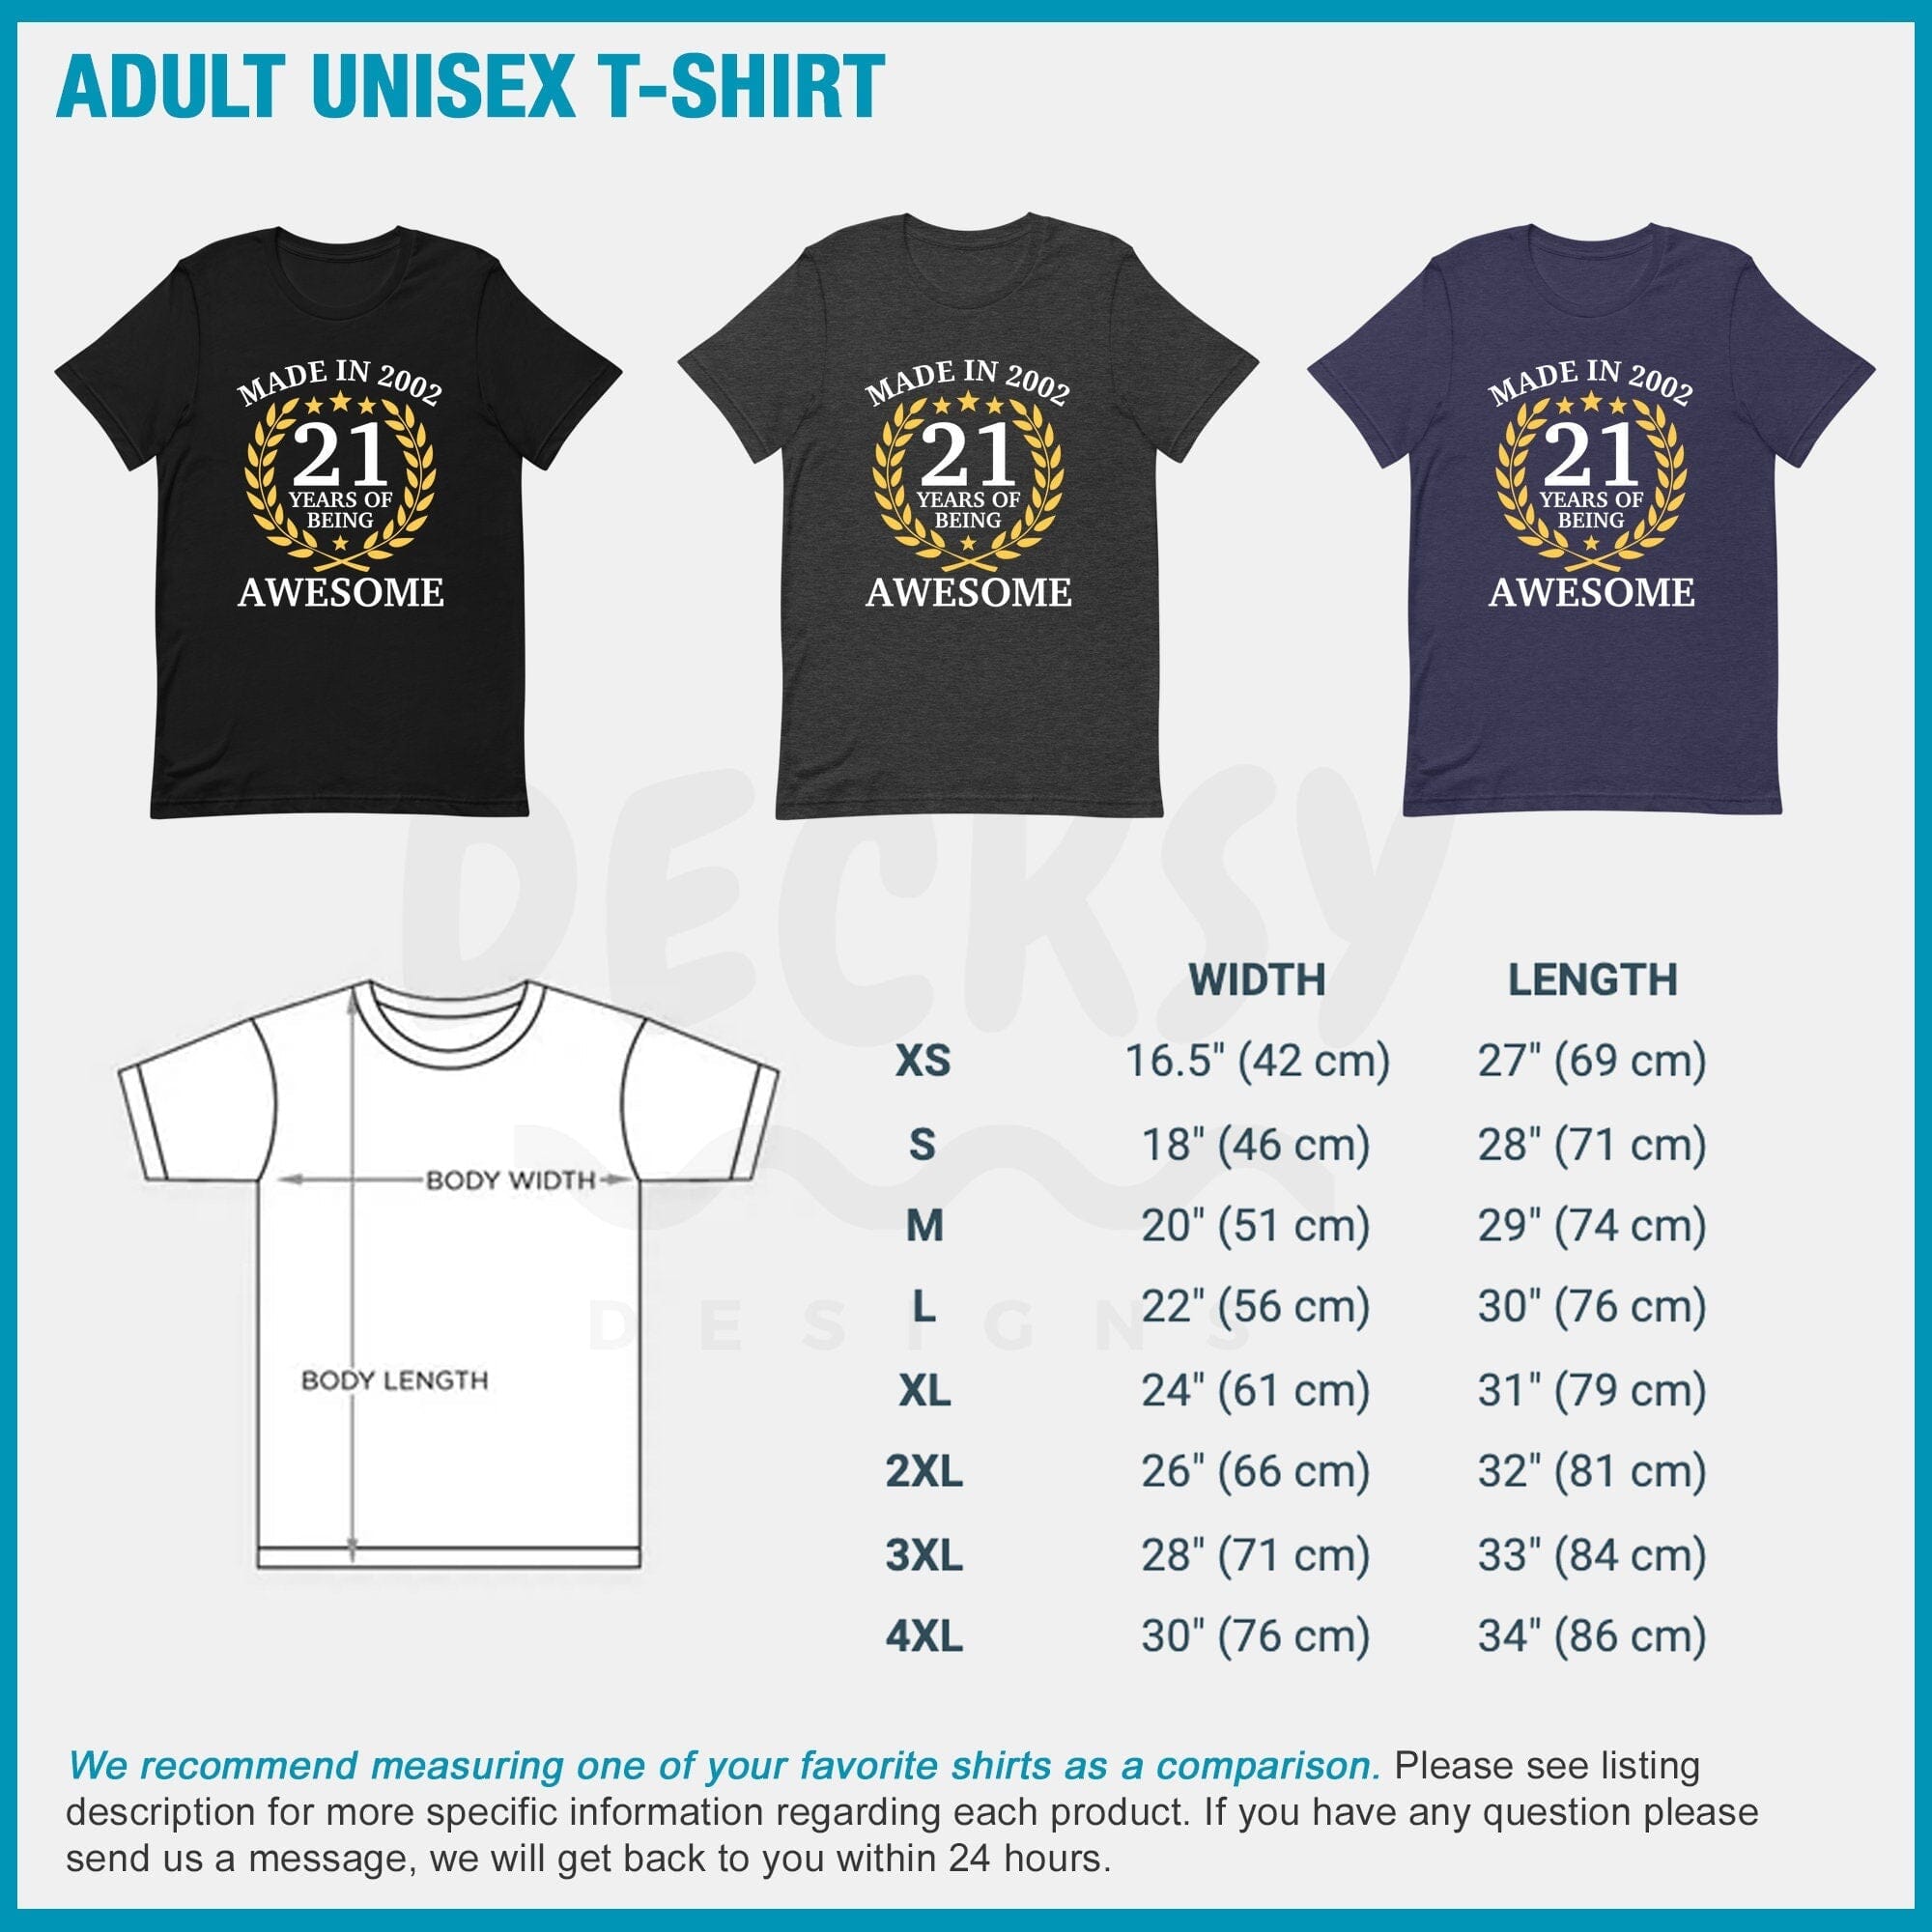 Born in 2002 Shirt, Personalised 21st Birthday Gift-Clothing:Gender-Neutral Adult Clothing:Tops & Tees:T-shirts:Graphic Tees-DecksyDesigns